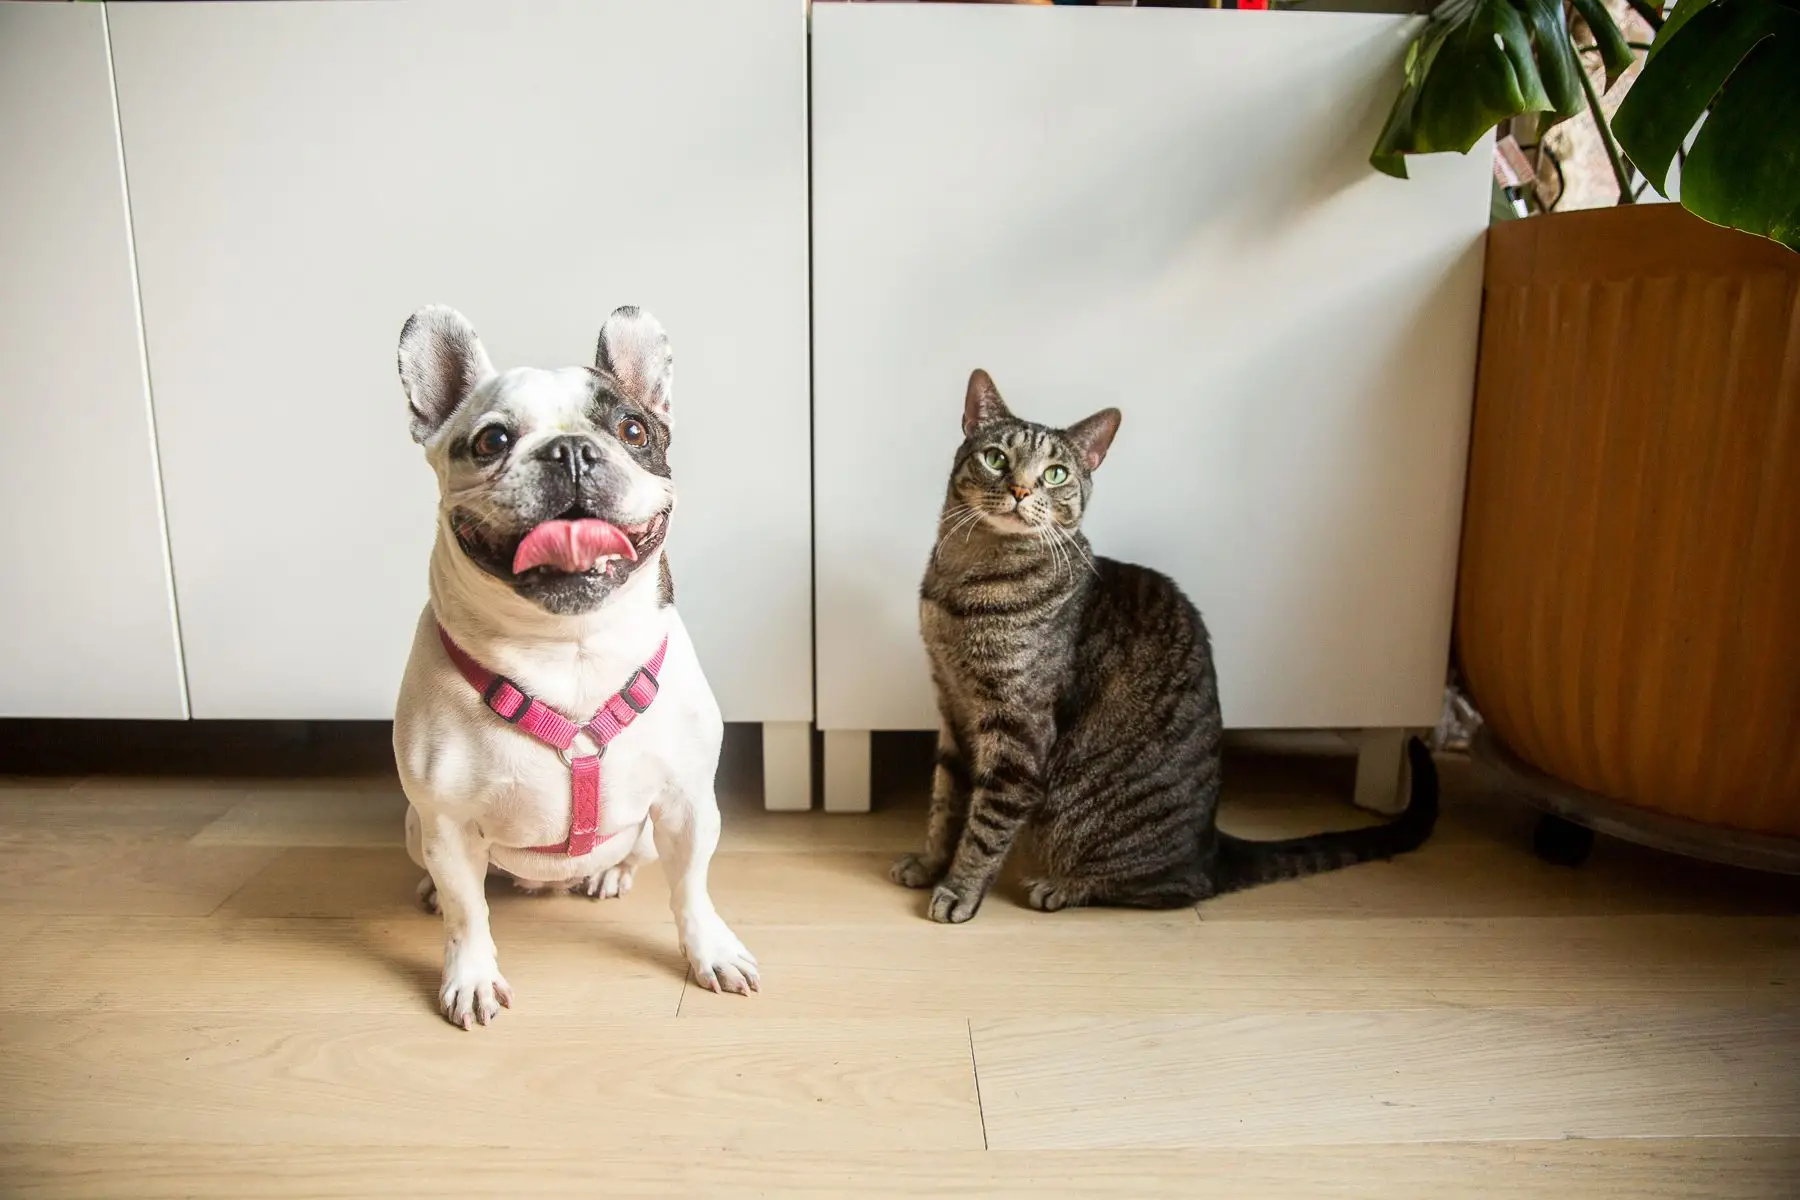 The Dog, the Cat, and the Mouse Story A Classic Tale of Friendship